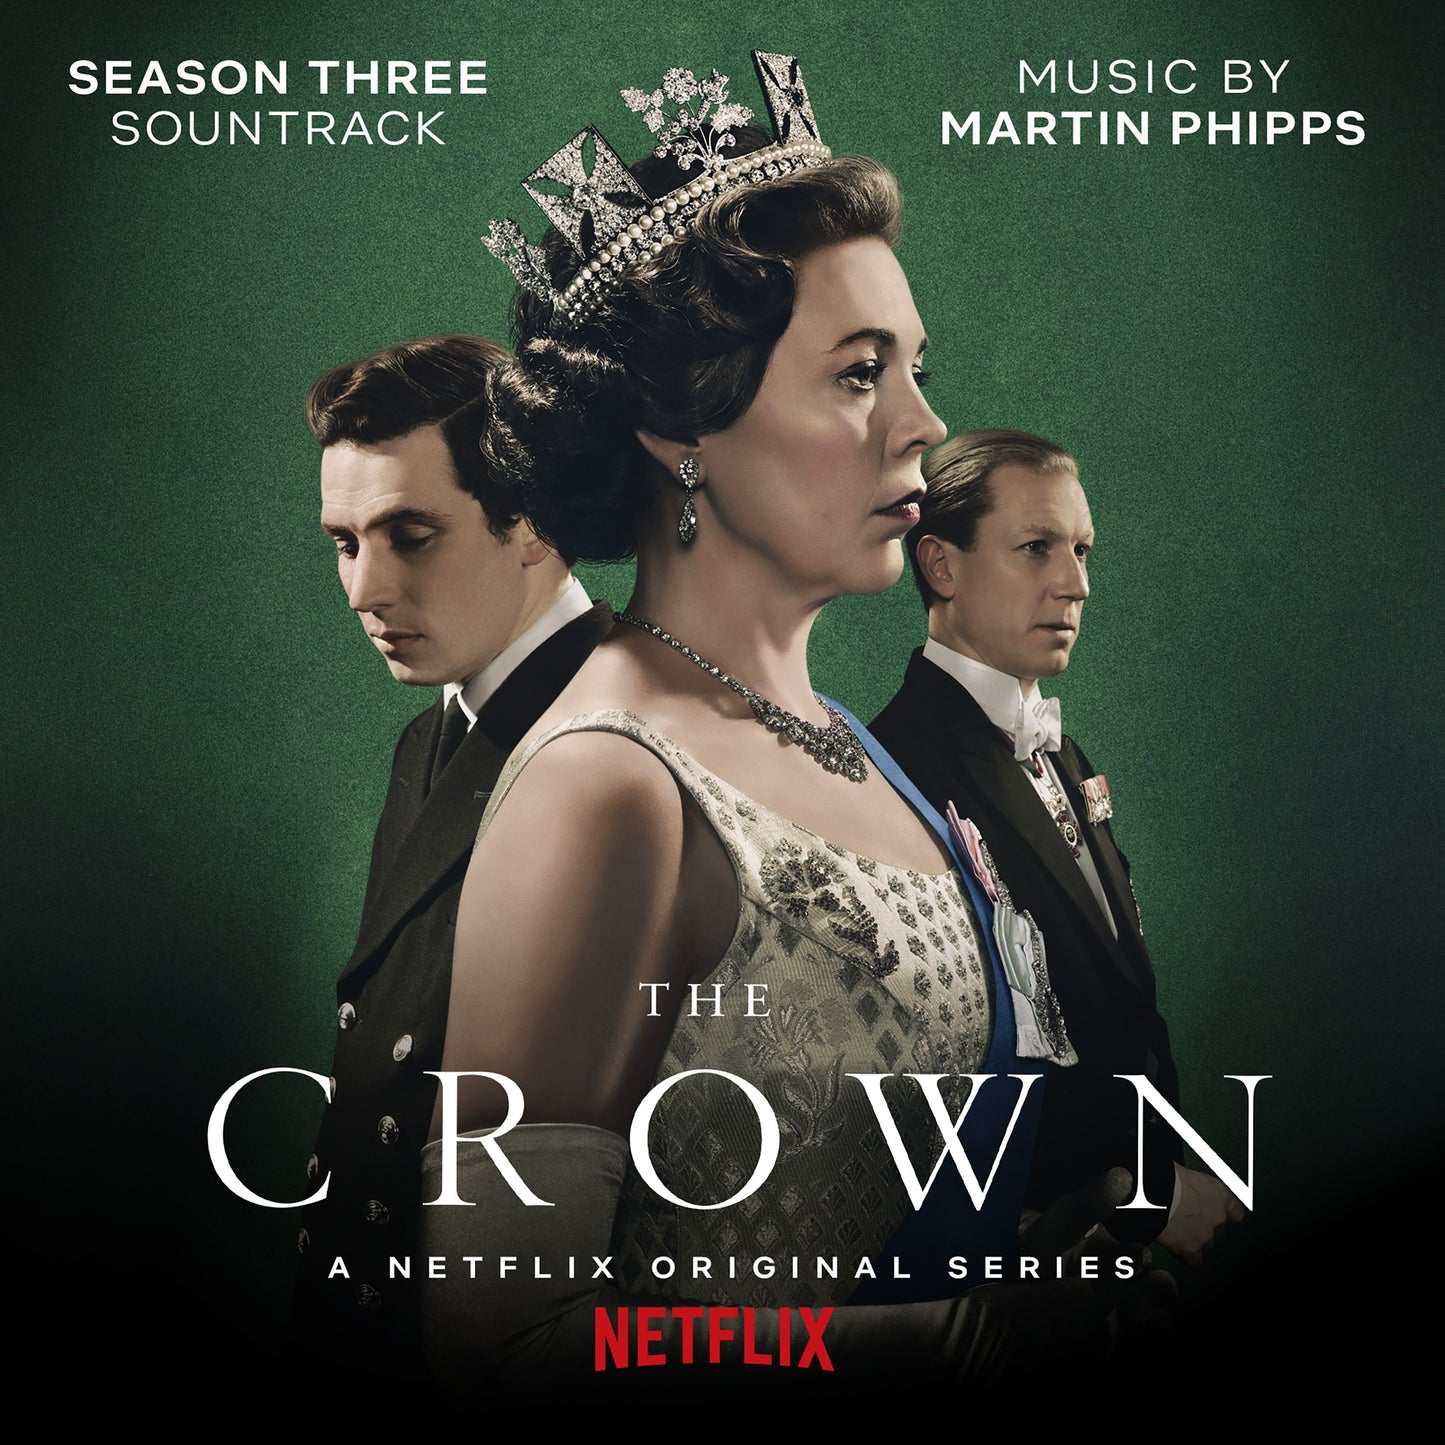 The Crown Season Three (Soundtrack from the Netflix Original Series)